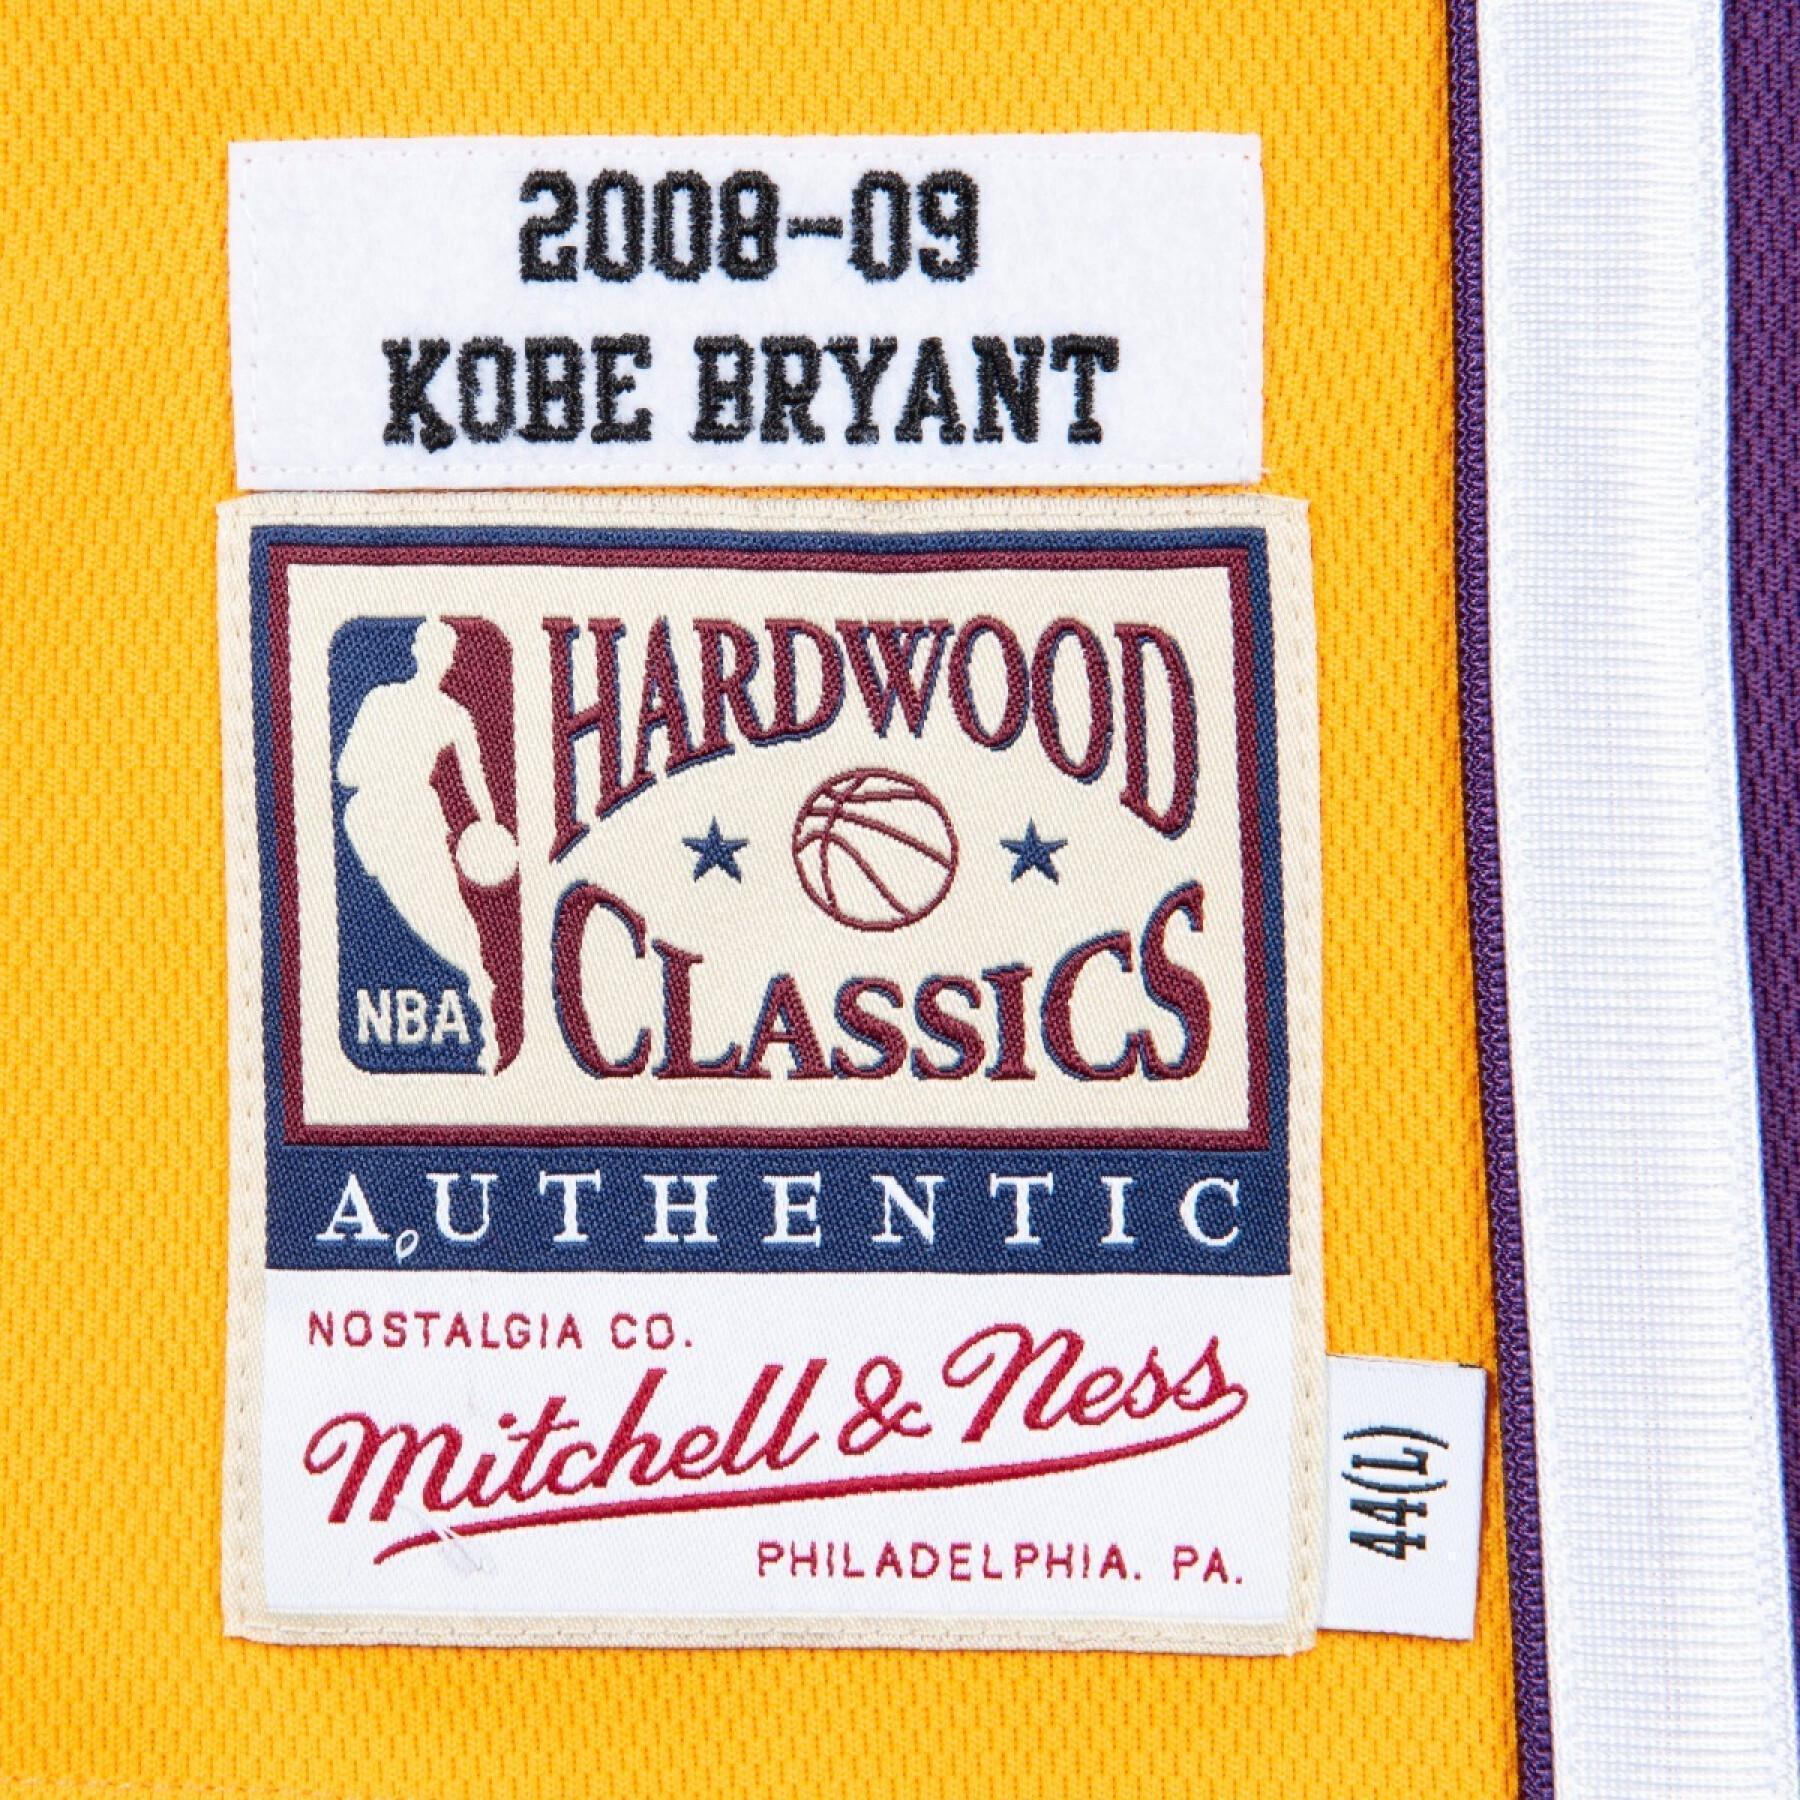 Maillot Los Angeles Lakers NBA Authentic Kobe Bryant